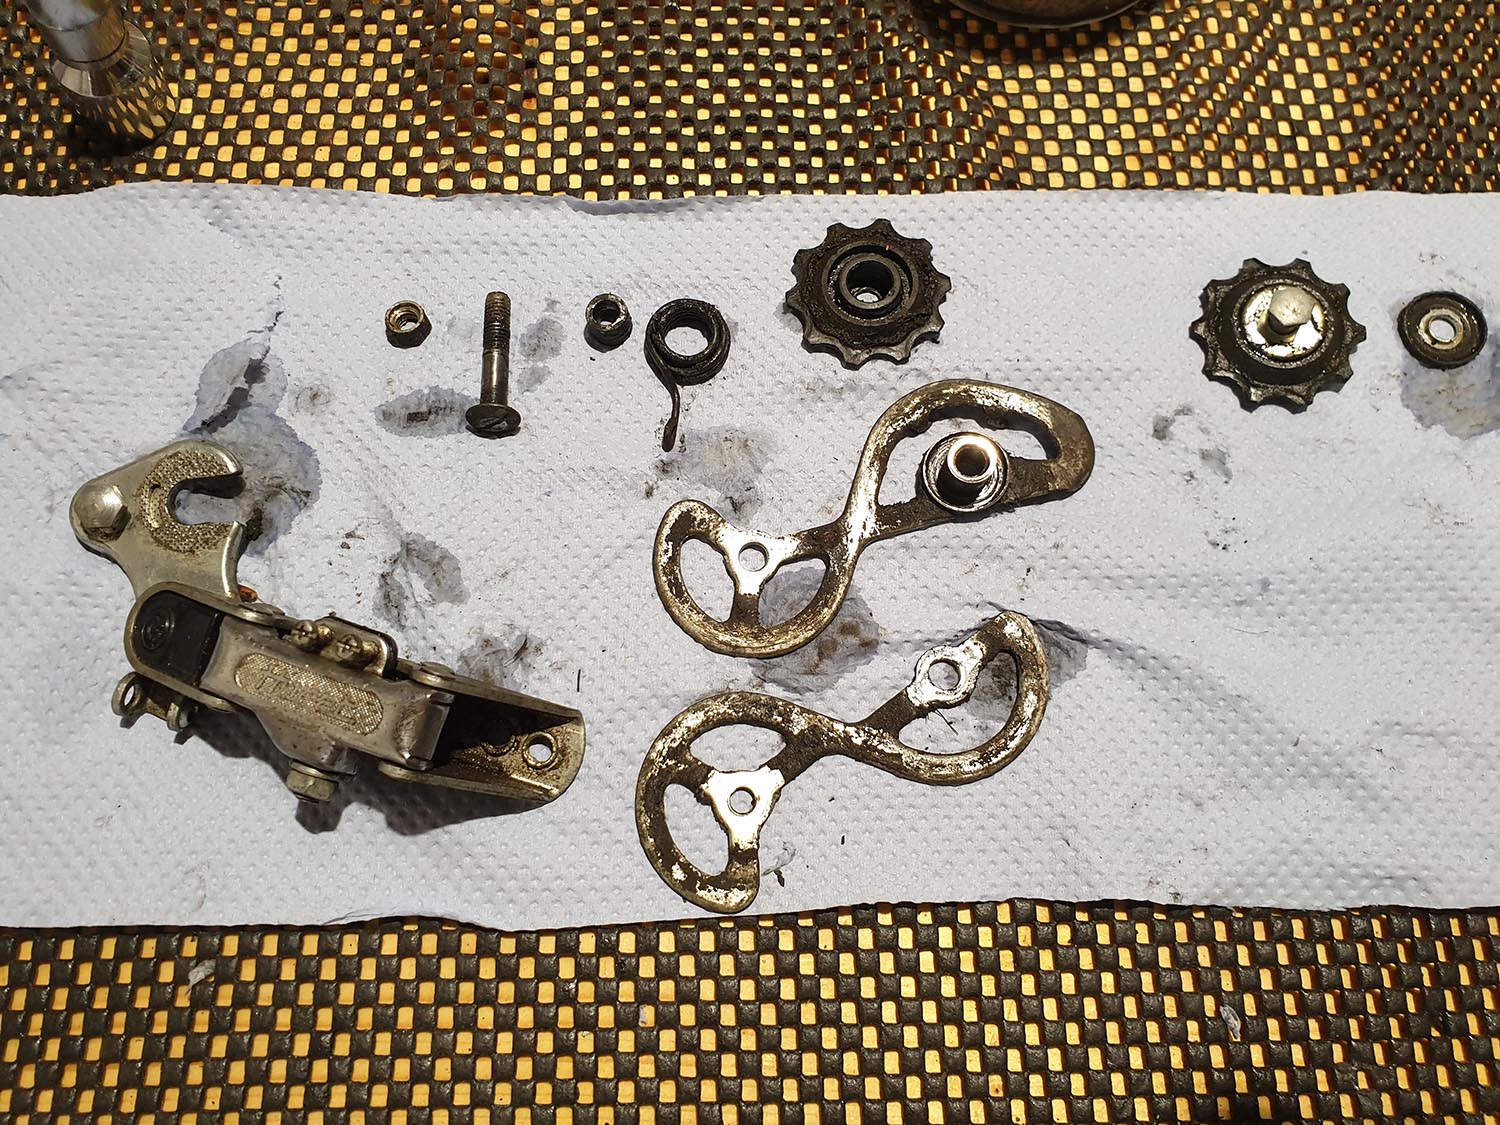 The rear Derailleur gear mechanism was heavily greased and dirty. Needed to be stripped, serviced and adjusted from Woodbridge.